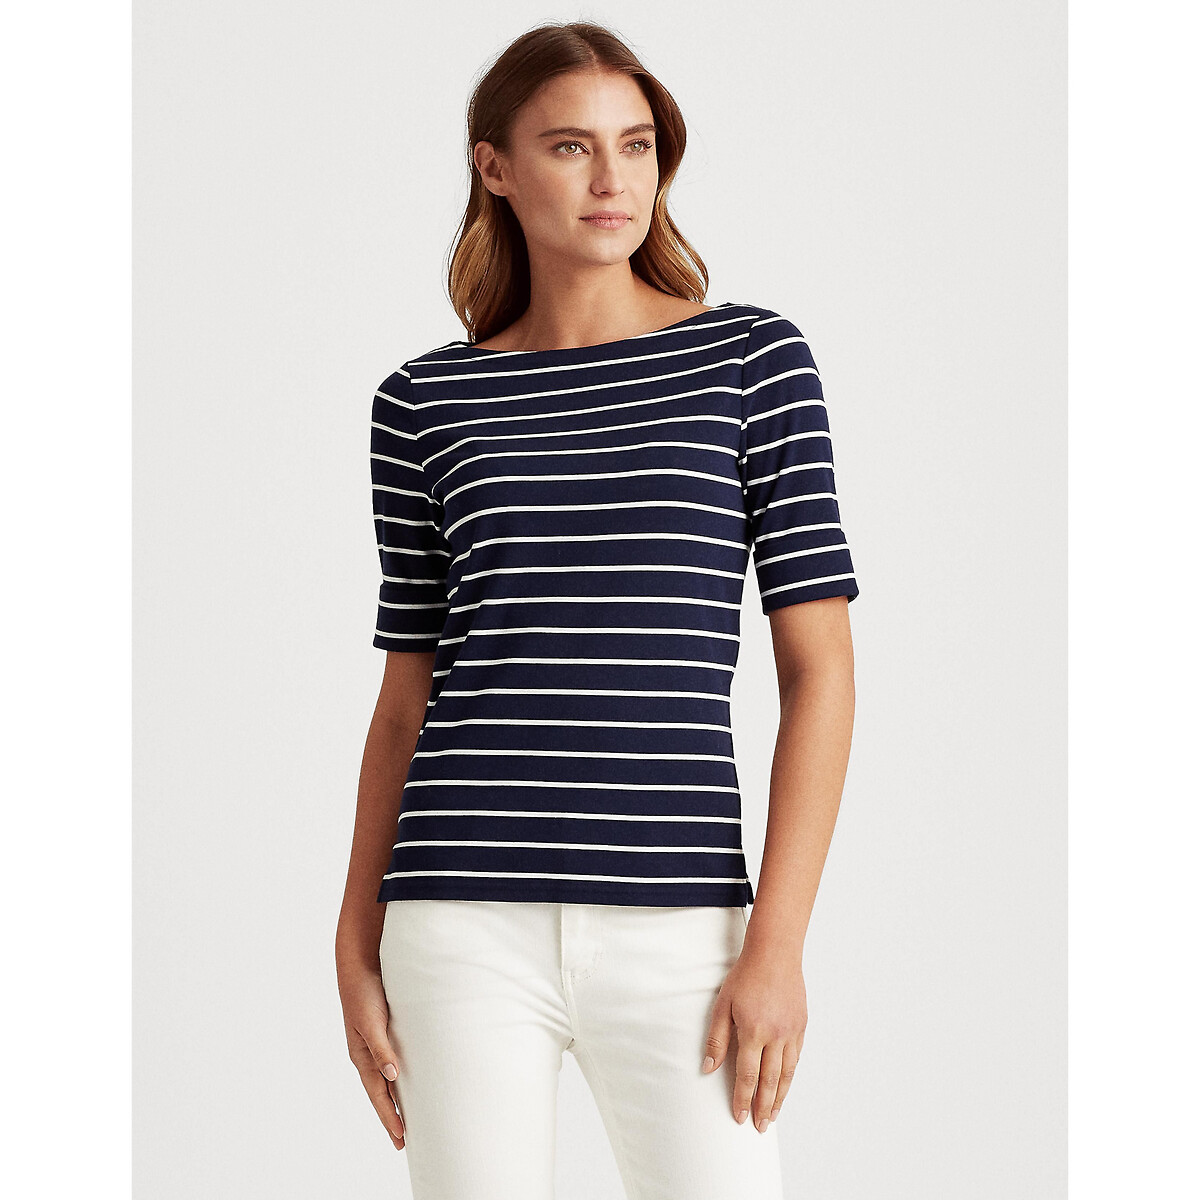 Image of Striped Boat Neck T-Shirt with Short Sleeves in Cotton